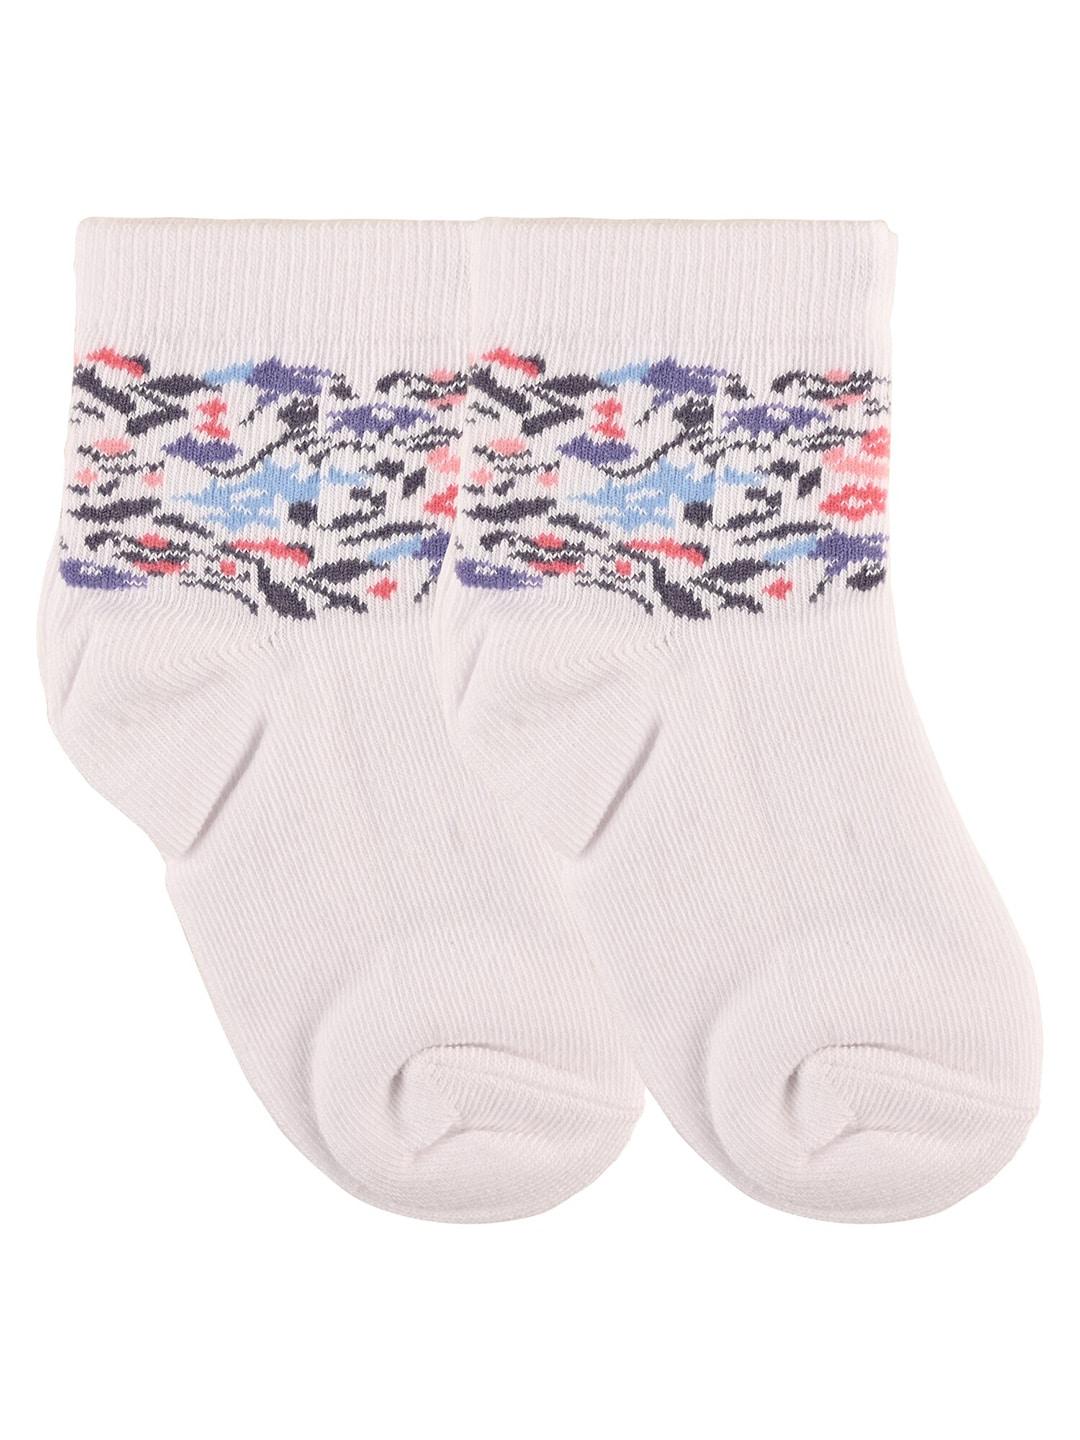 Nuluv Girls Pack Of 2 Patterned Anti-Microbial Ankle-Length Socks